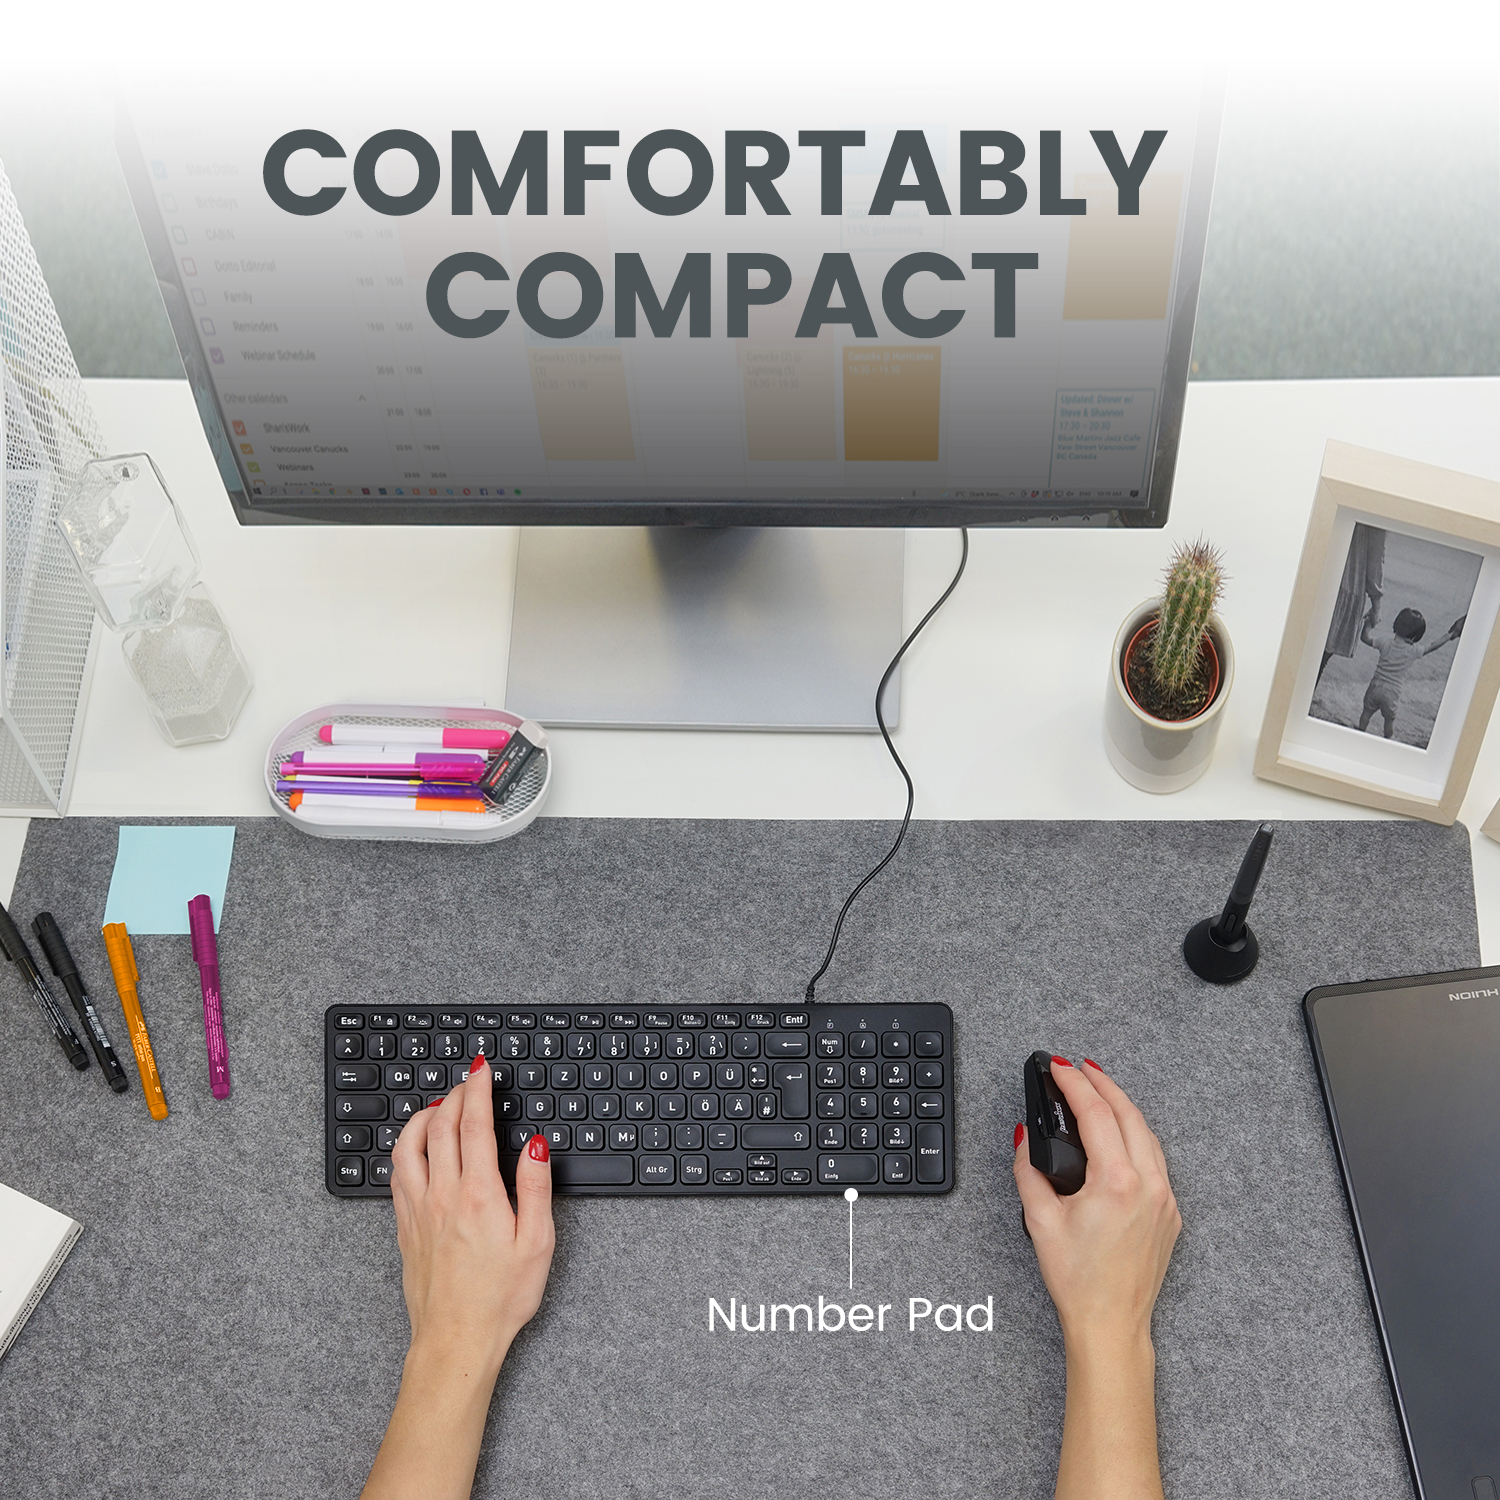 Comfortably Compact